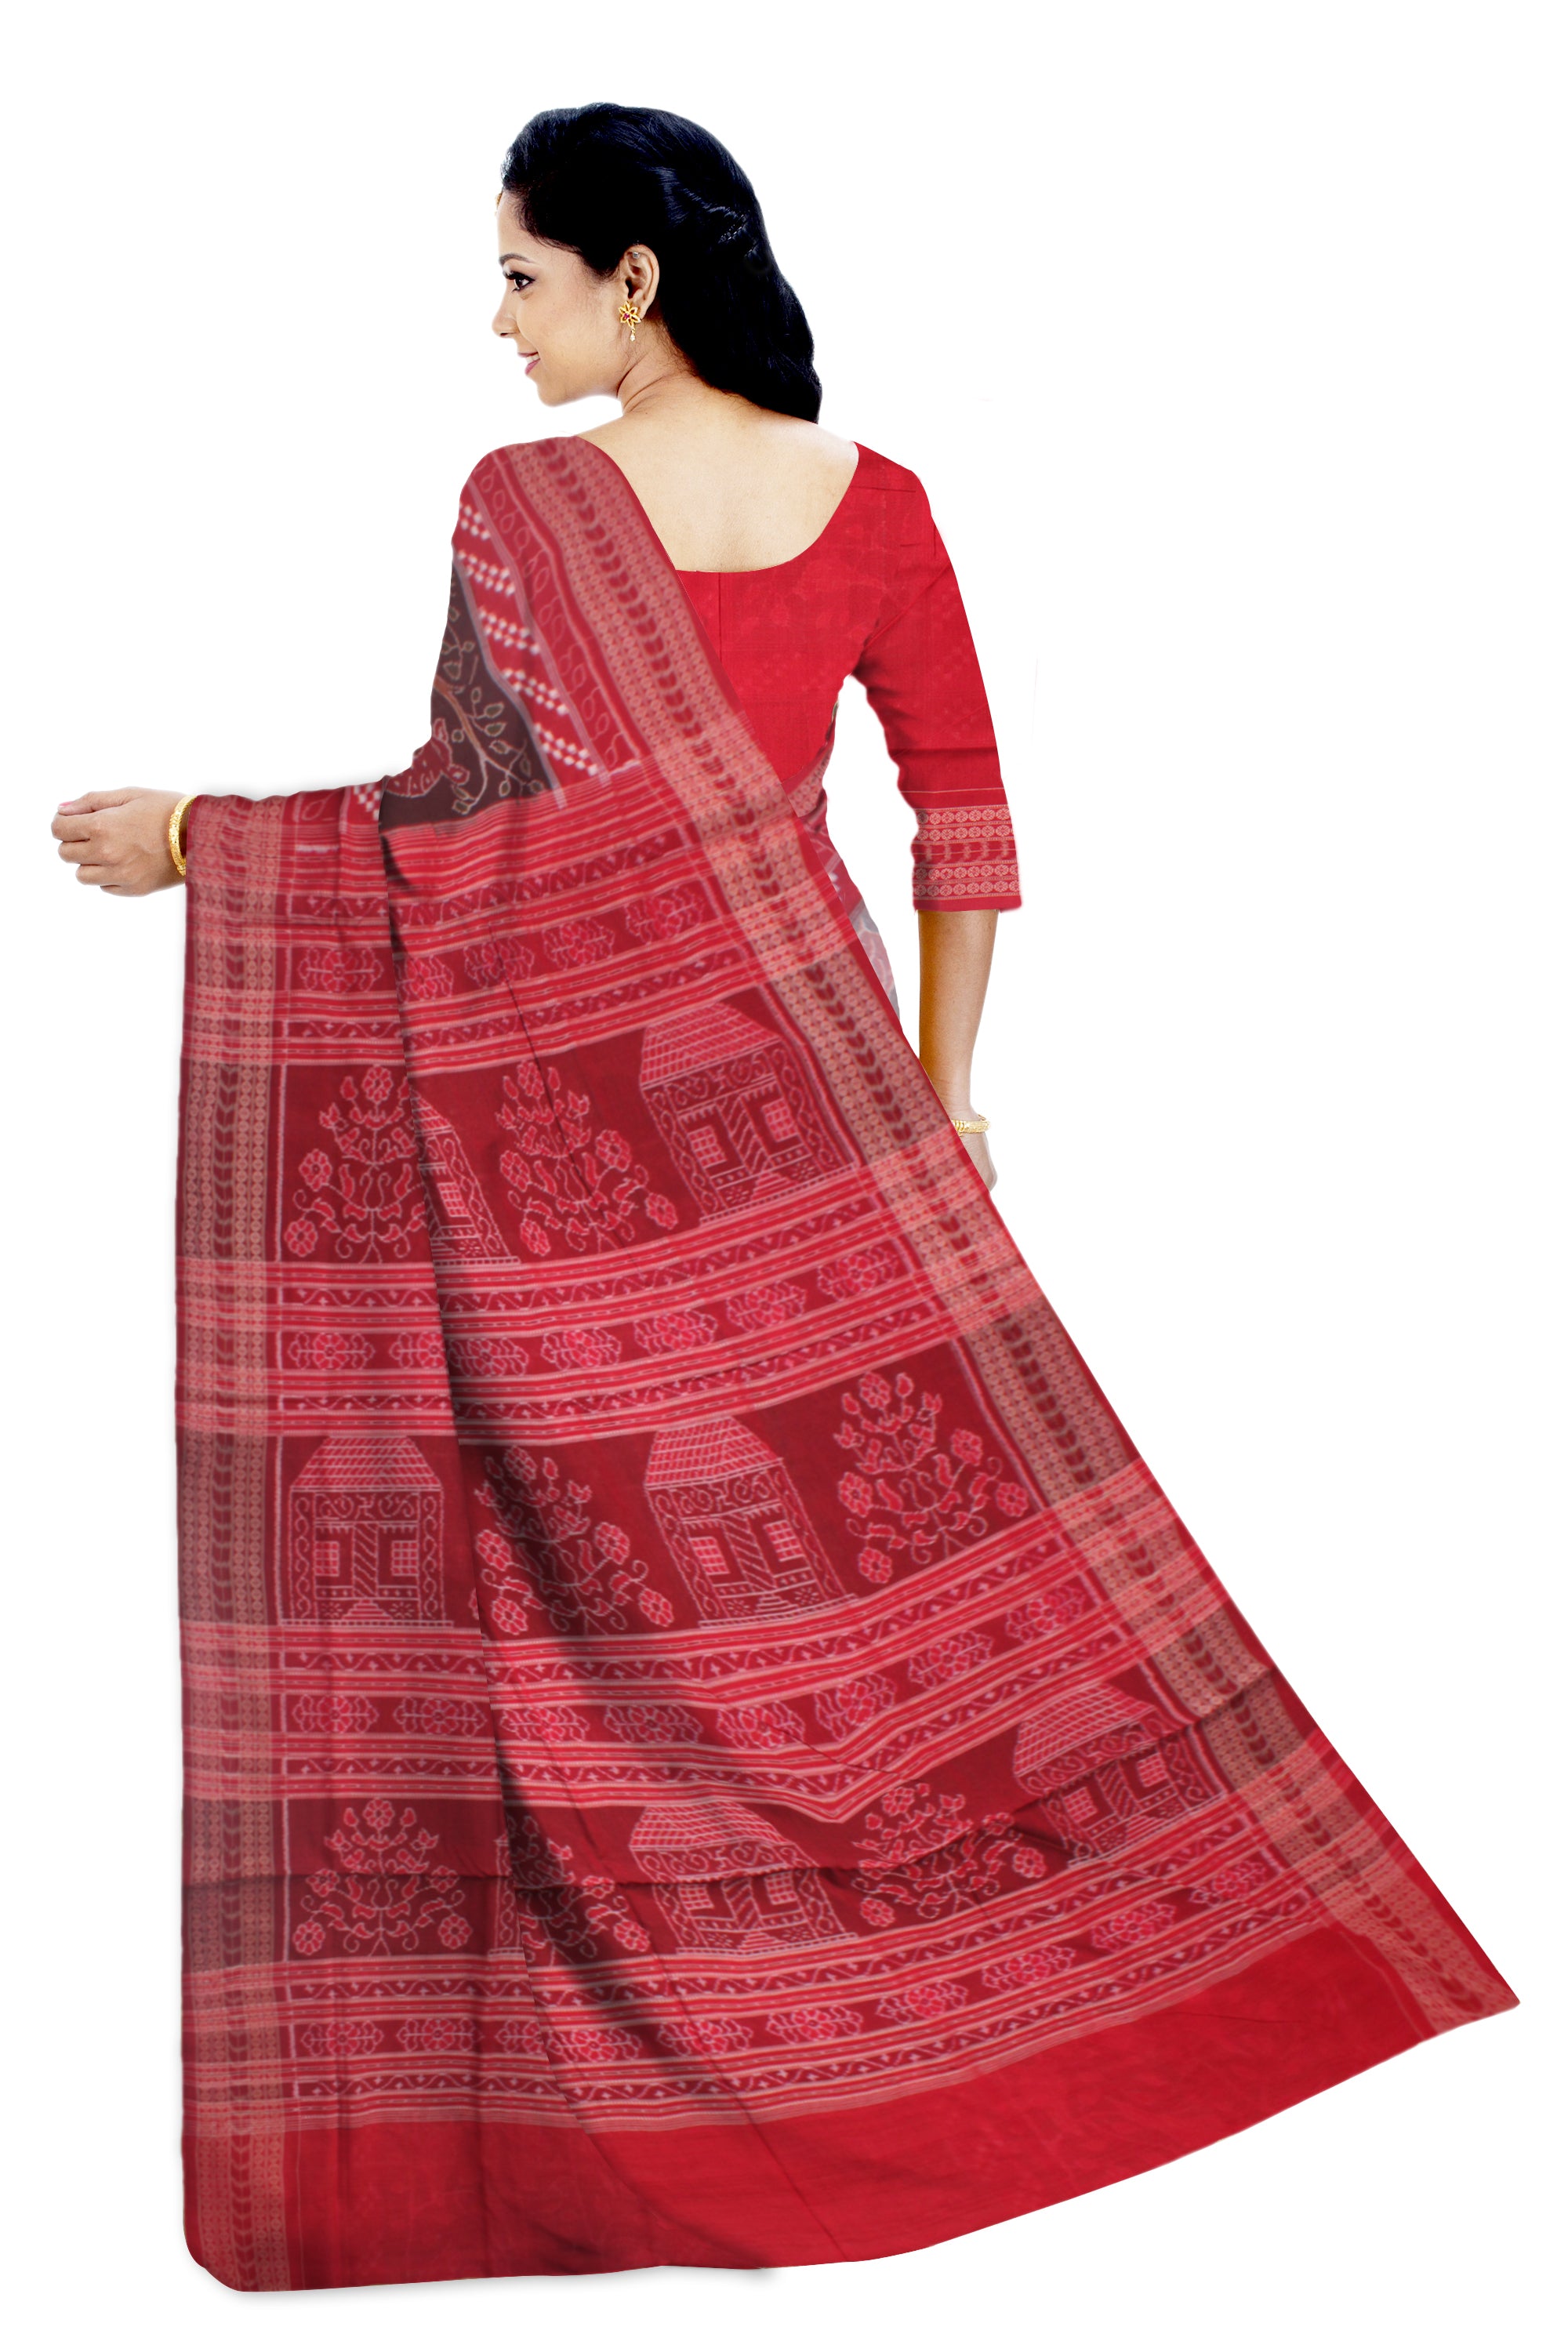 TRADITIONAL FOREST ANIMAL PATTERN  SILVER, COFFEE AND RED COLOR PURE COTTON SAREE,WITH MATCHING BLOUSE PIECE. - Koshali Arts & Crafts Enterprise